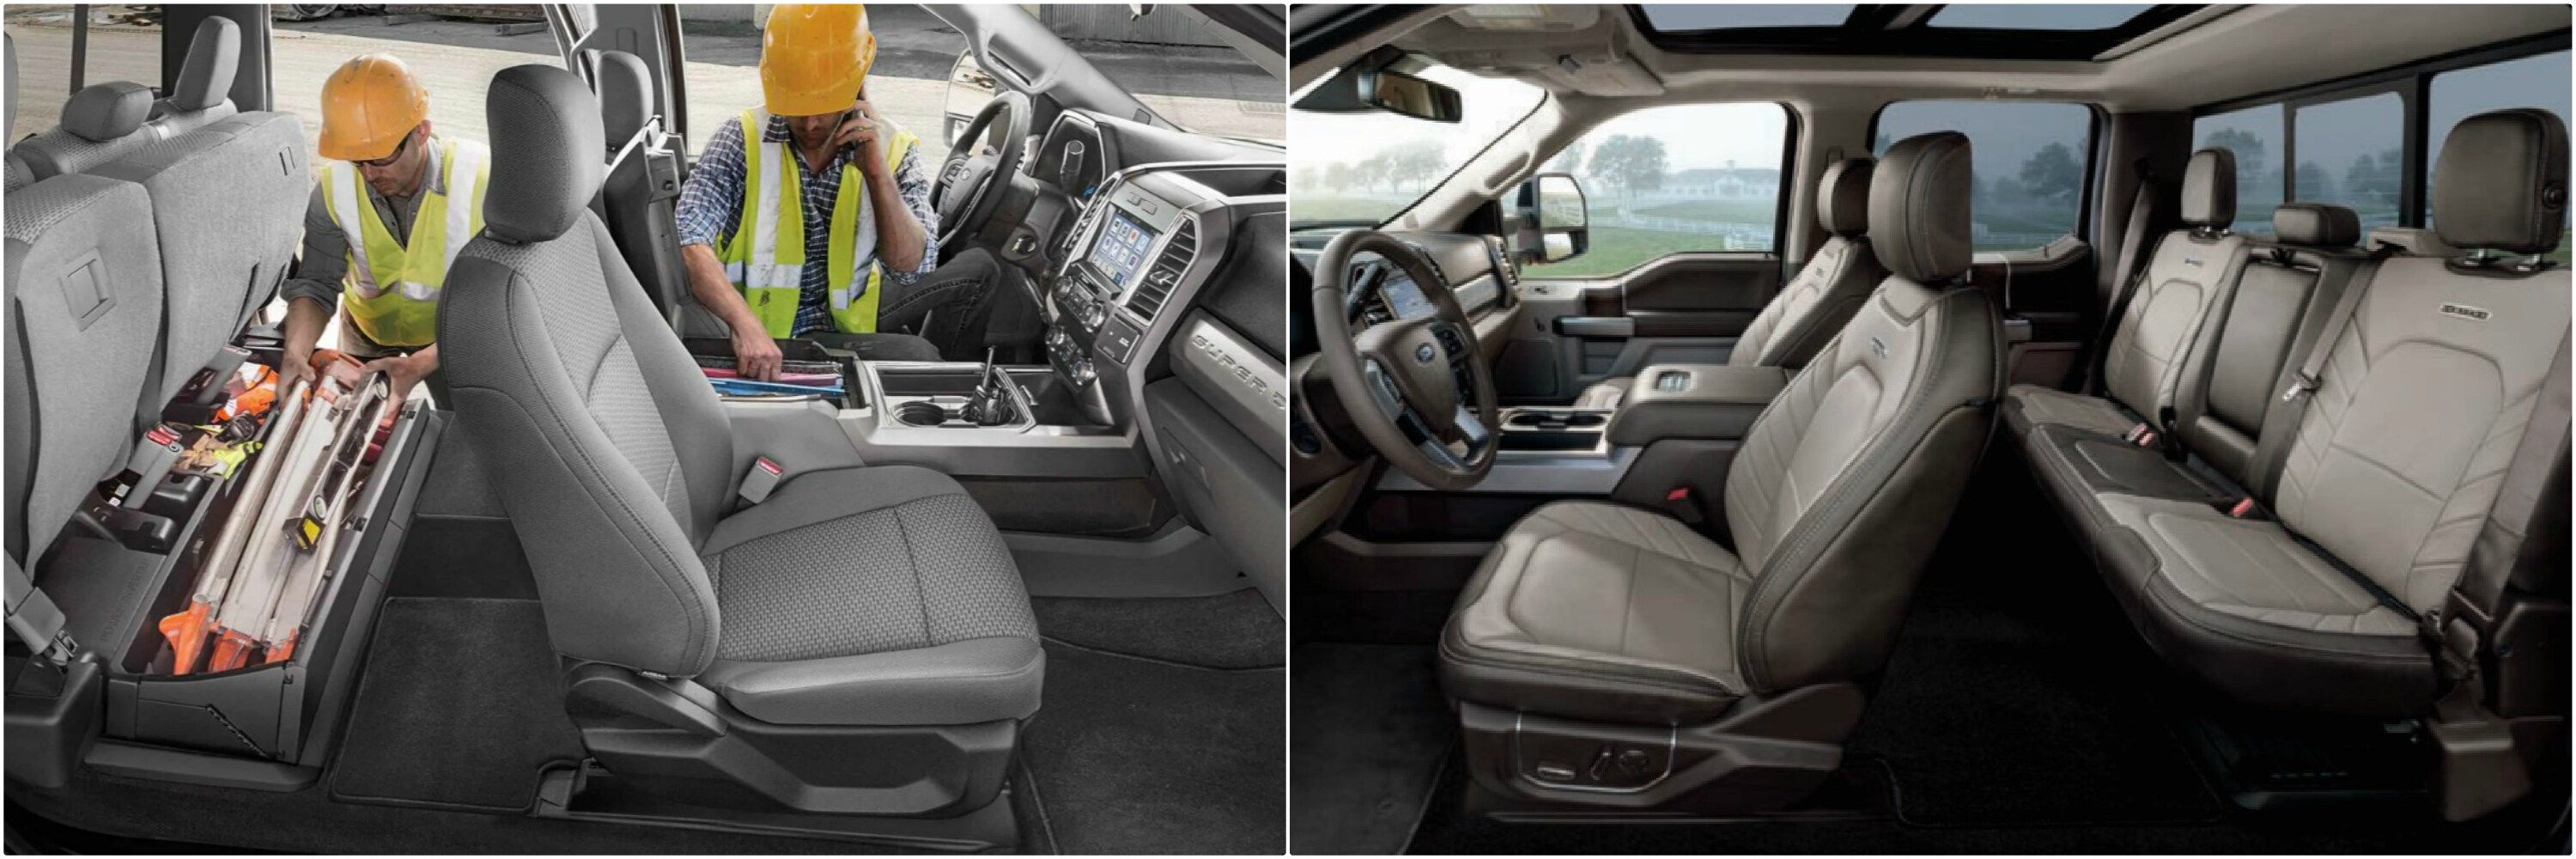 the interior design and seating of used Ford Super Duty Trucks